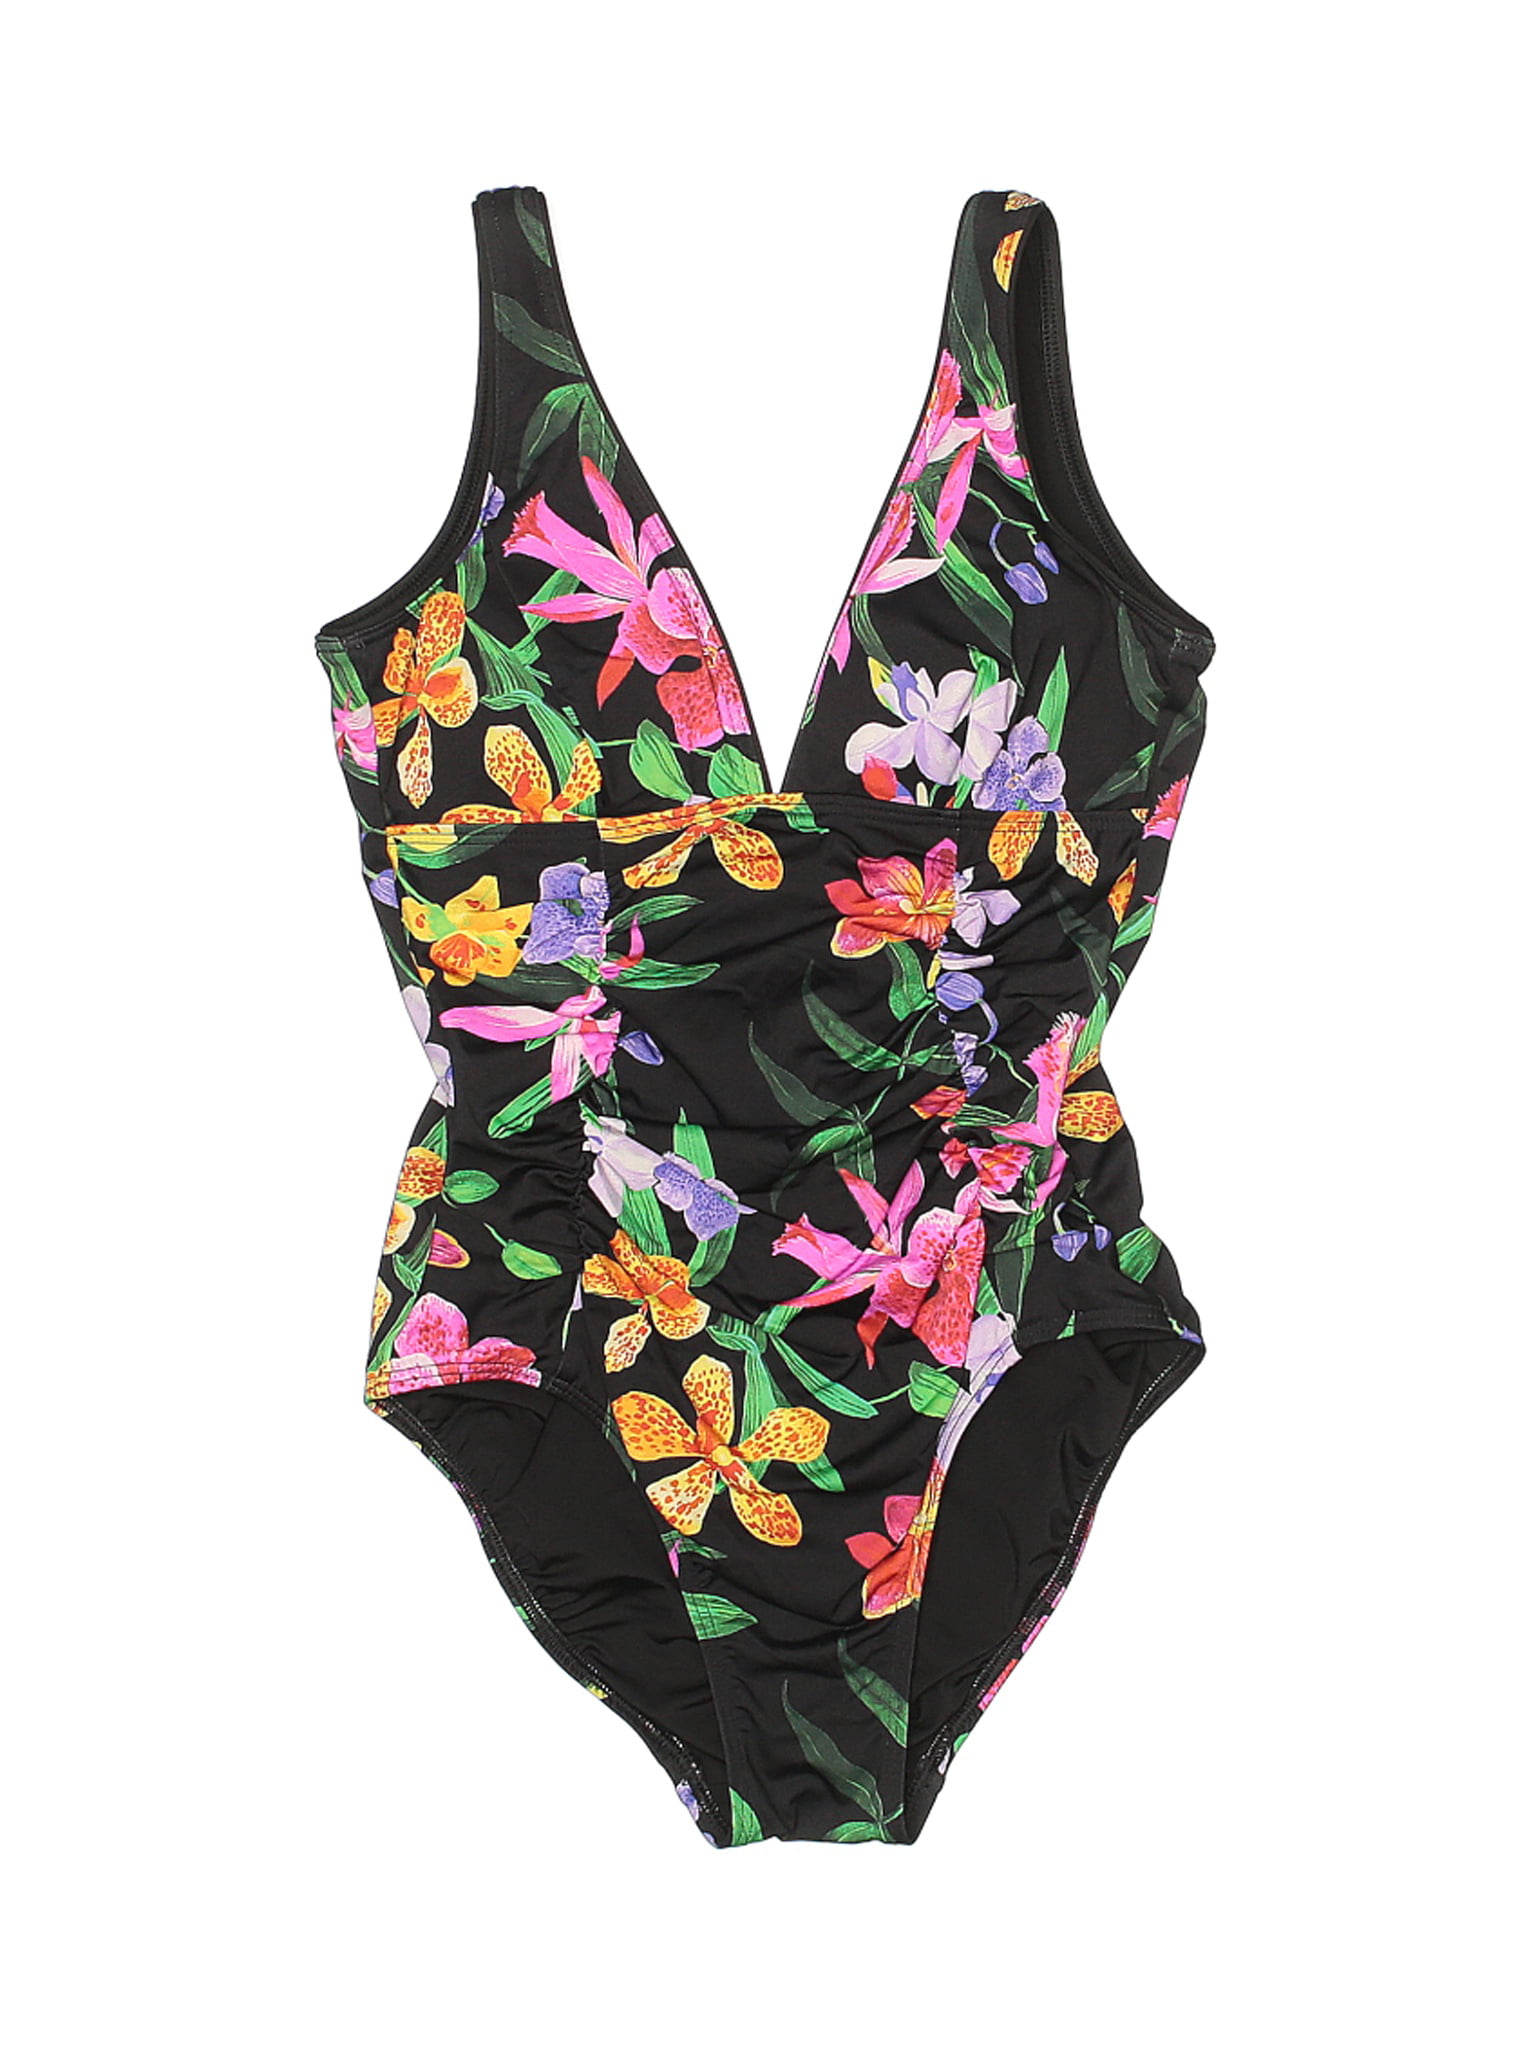 Lands' End - Pre-Owned Lands' End Women's Size 0 One Piece Swimsuit ...